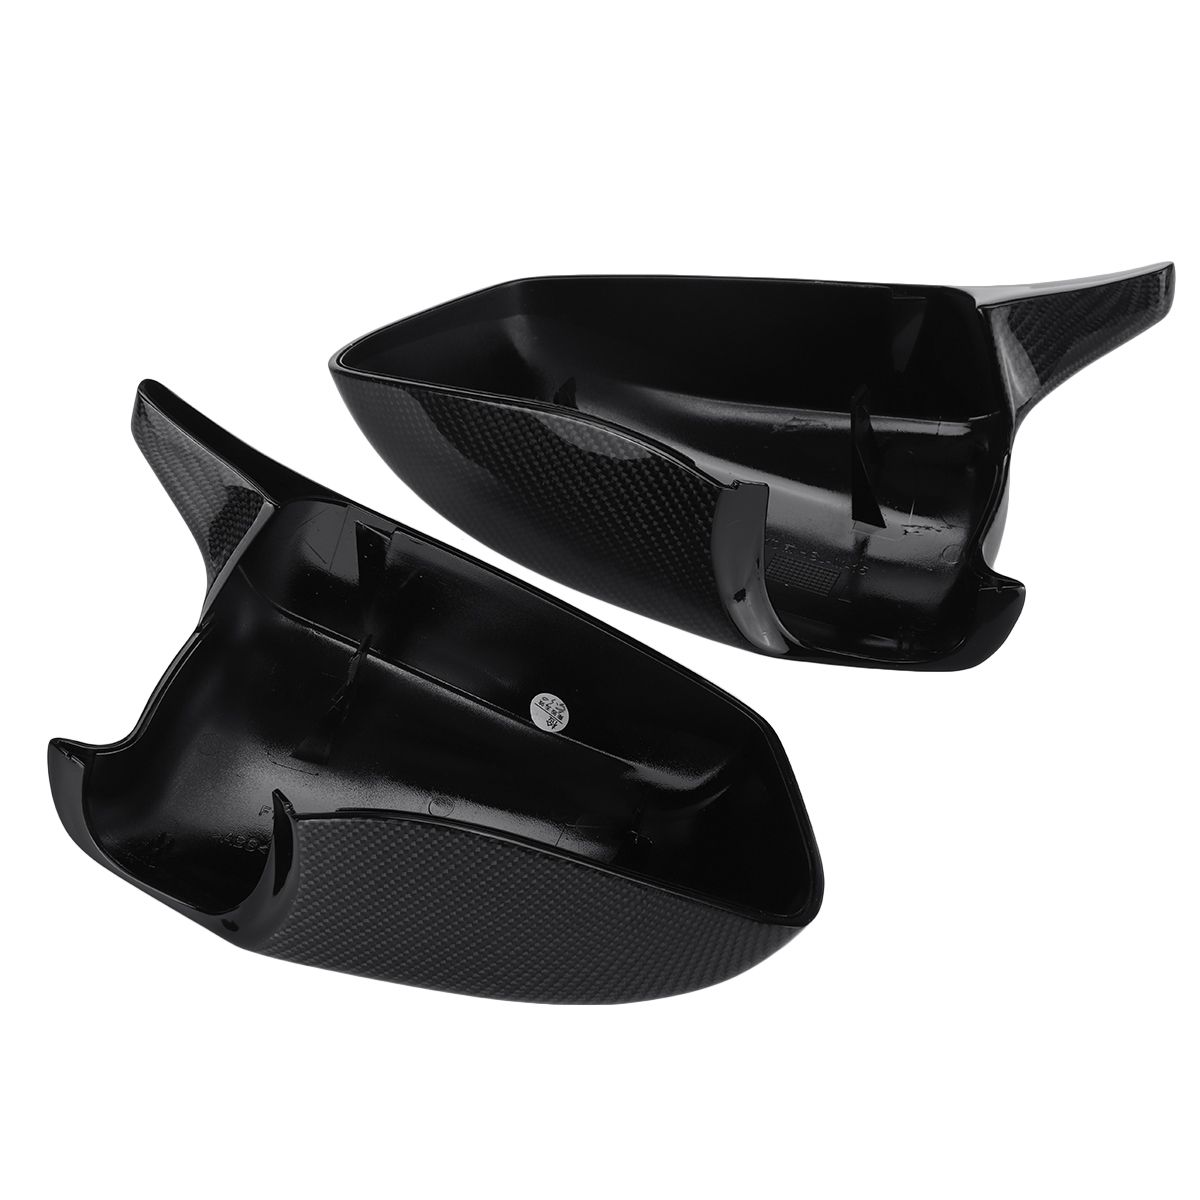 M-Style-Real-Carbon-Fiber-Rear-View-Mirror-Cap-Cover-Replacement-For-BMW-F10-F11-F18-2010-2013-1754883